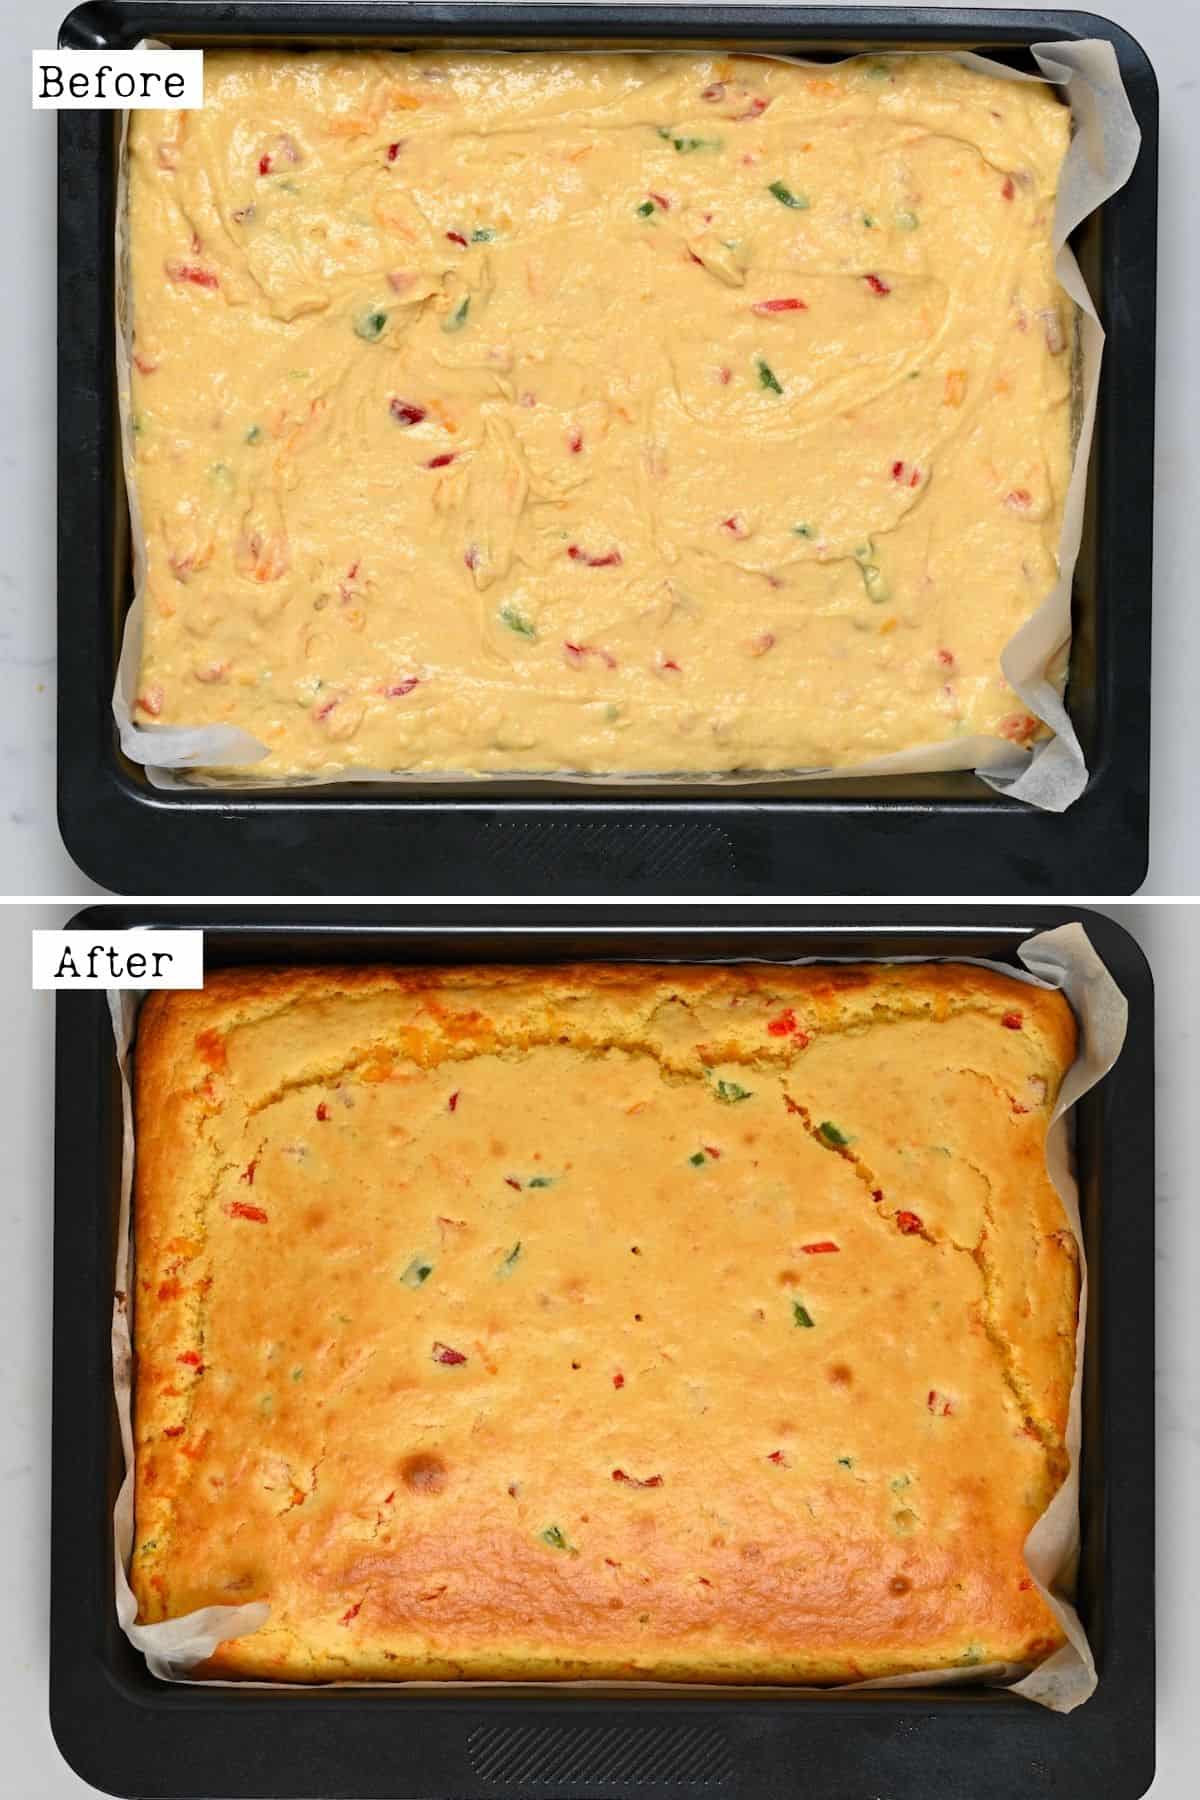 Before and after baking jalapeño cornbread